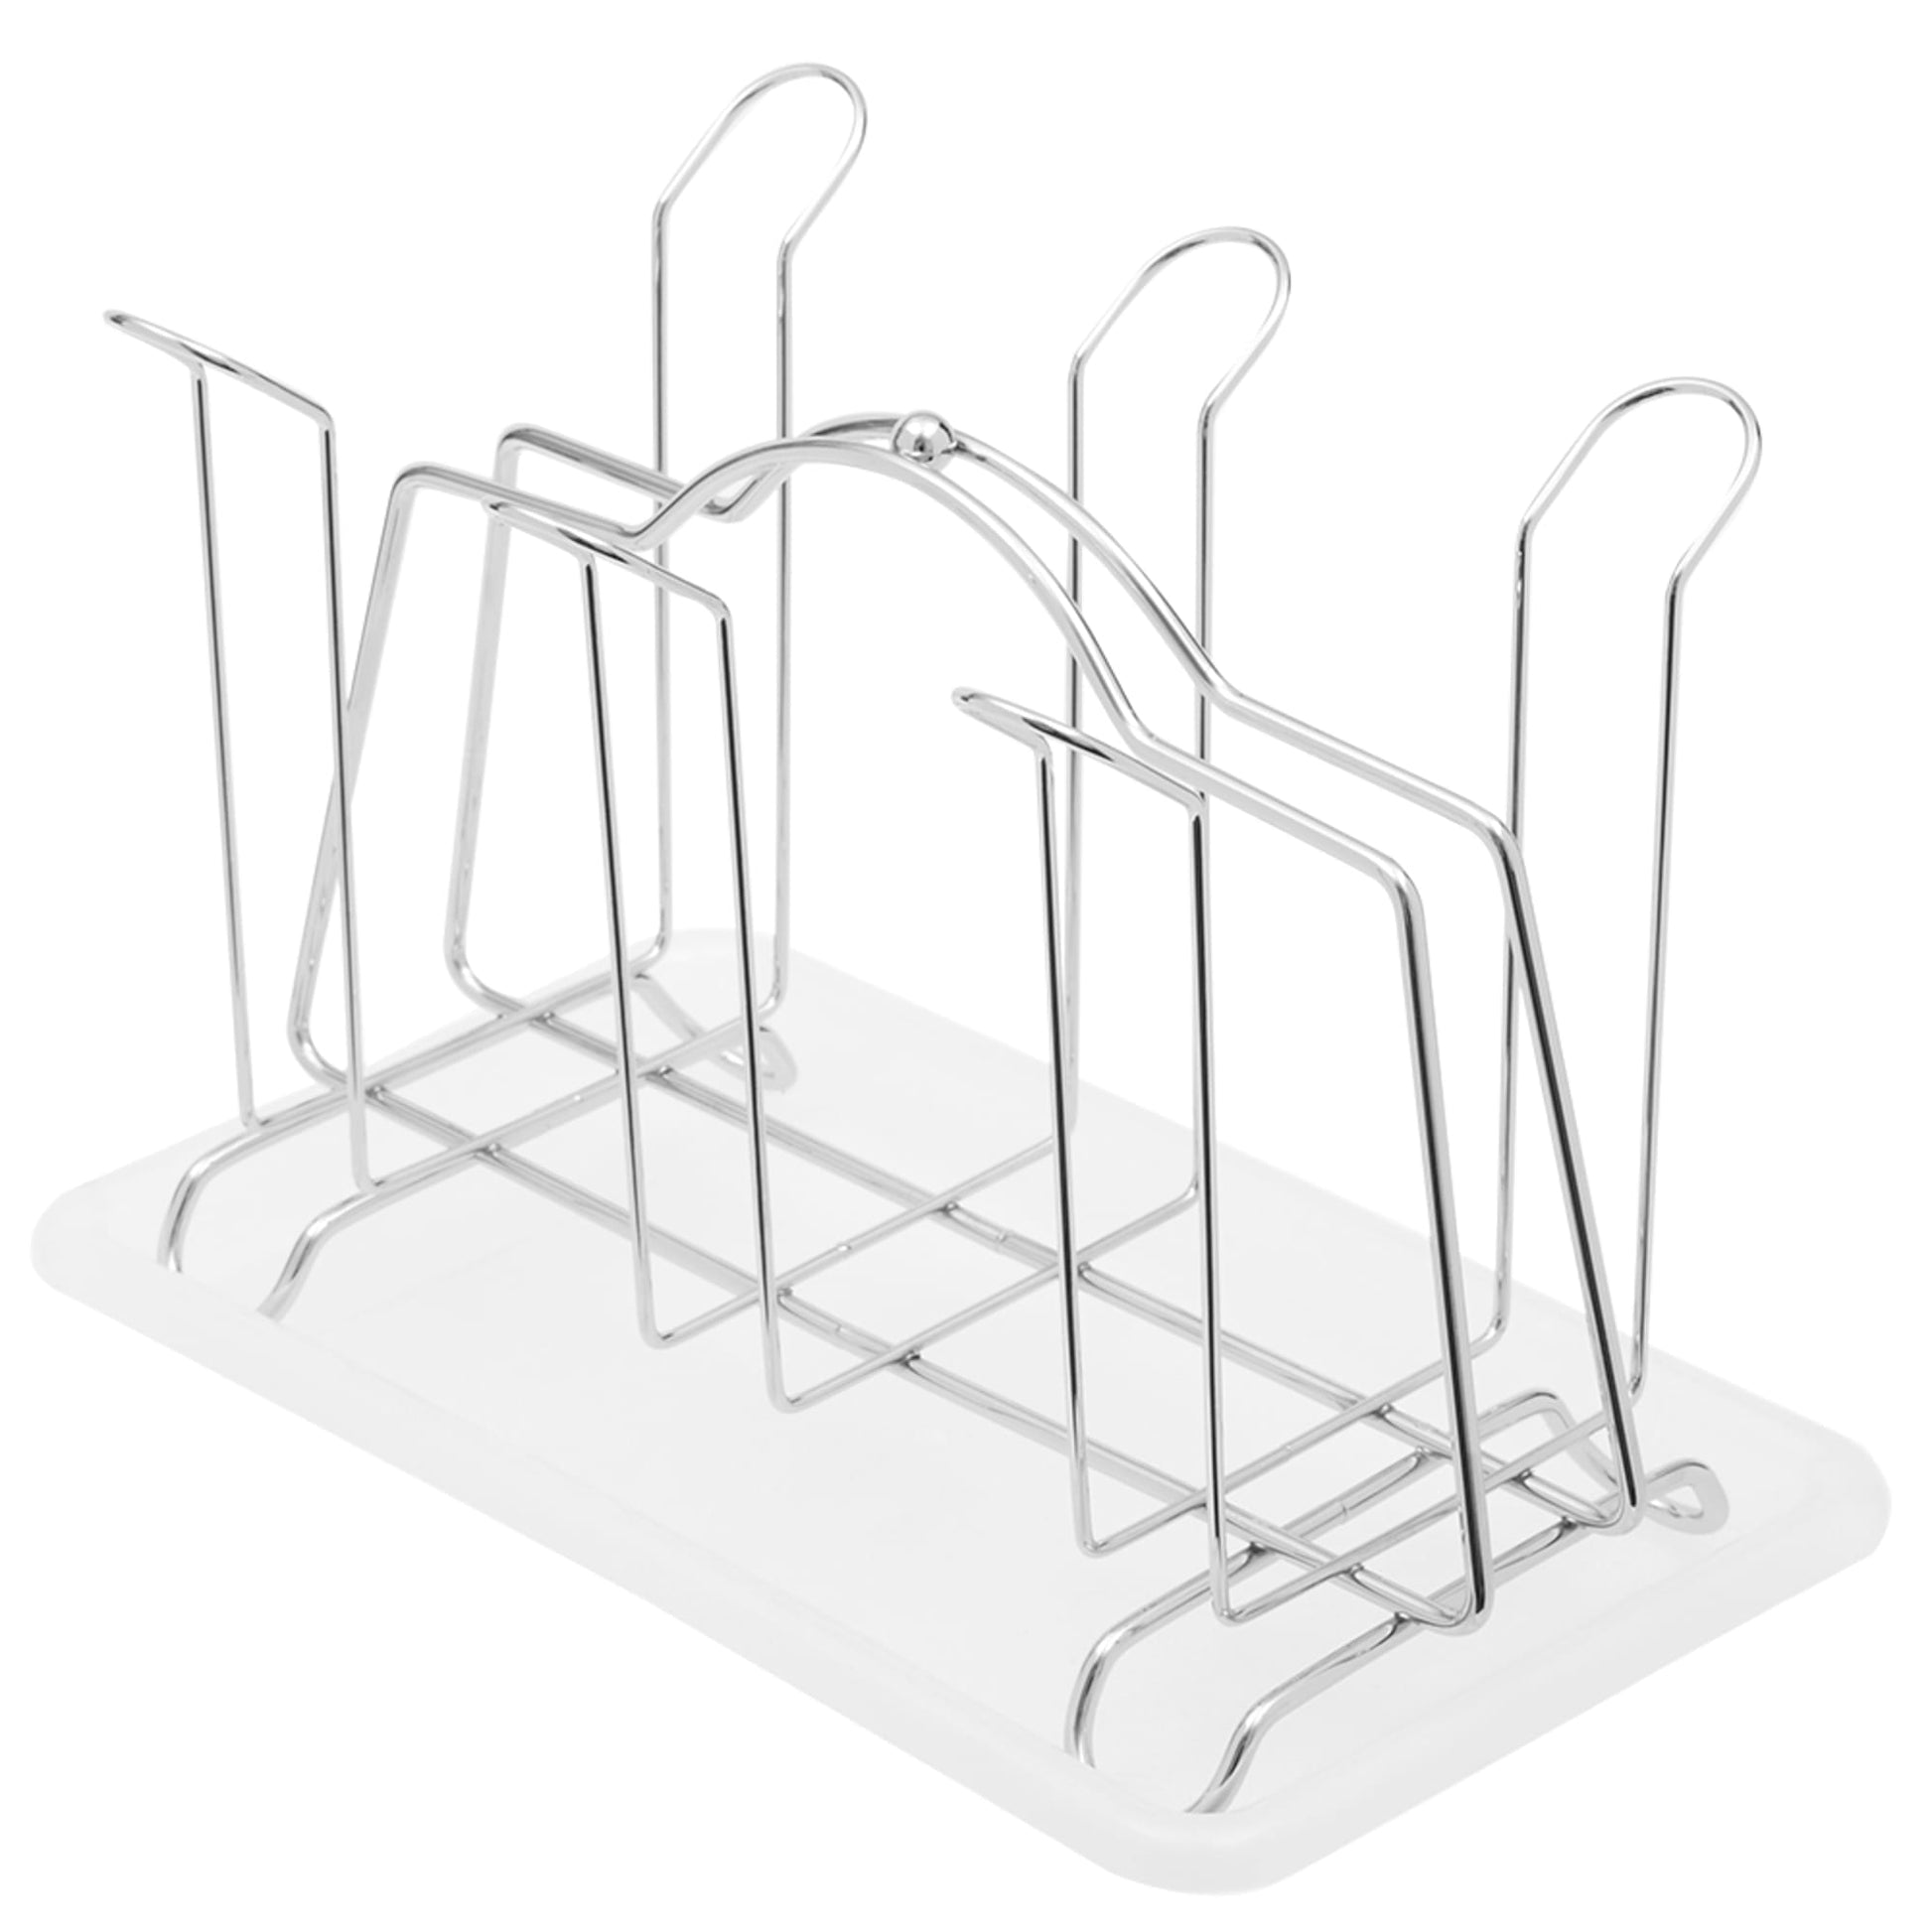 Cup Drying Rack Stand-6 Cup Metal Drainer Holder Rack- Non-Slip Mugs Cups  Organizer Kfc11014 - China Stainless Cup Holder Rack and Cup Holder price